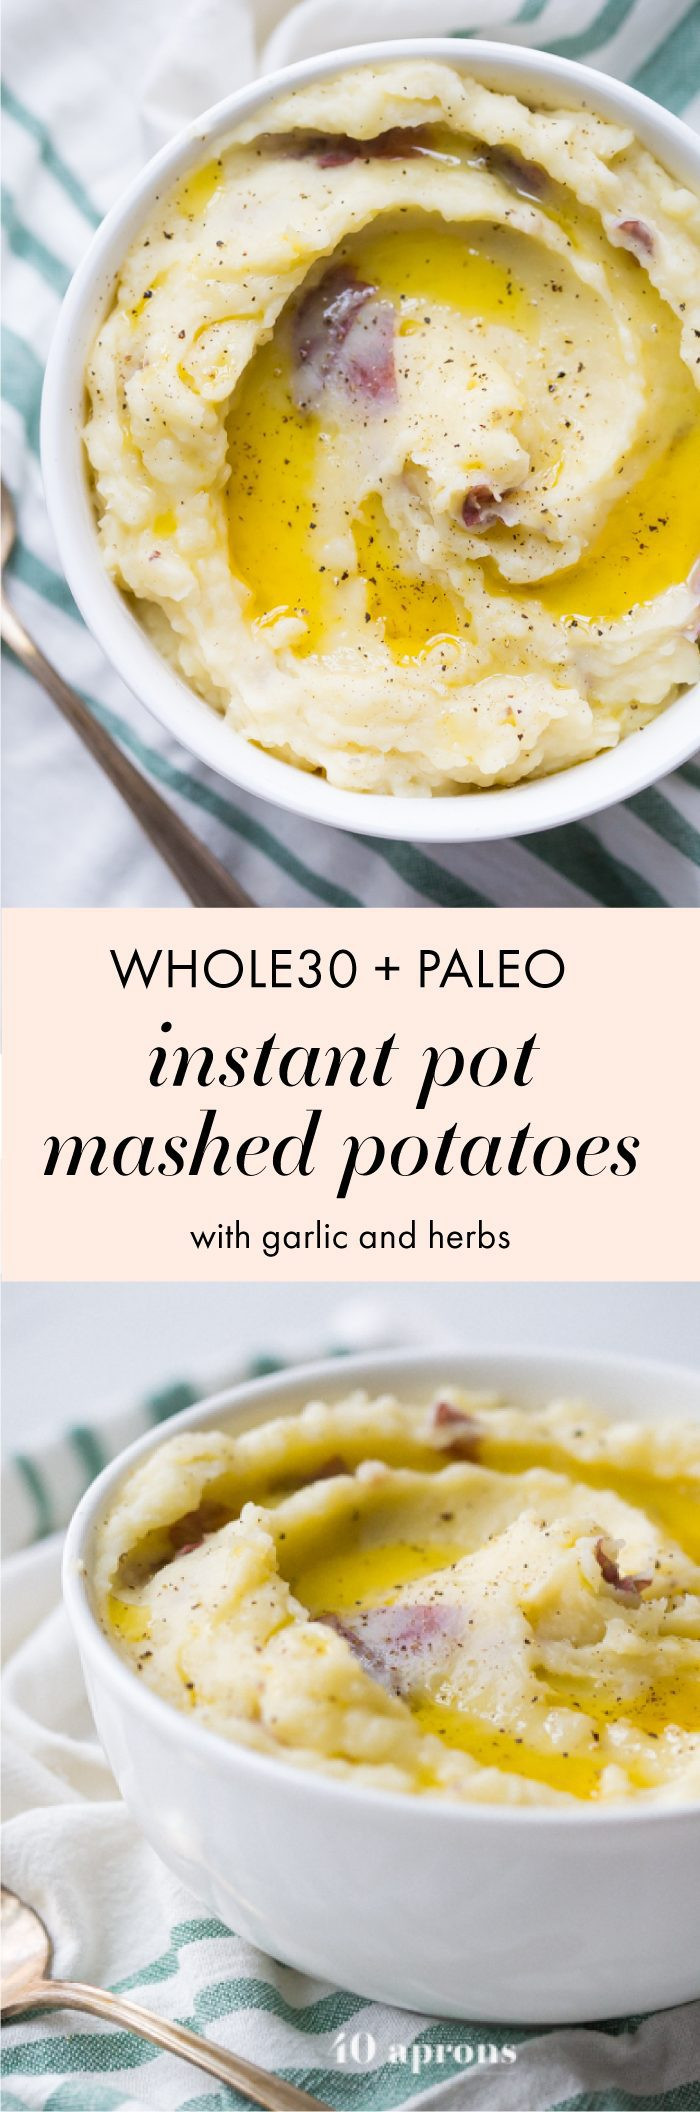 Instant Mashed Potatoes Healthy
 Whole30 Instant Pot Mashed Potatoes with Garlic & Herbs